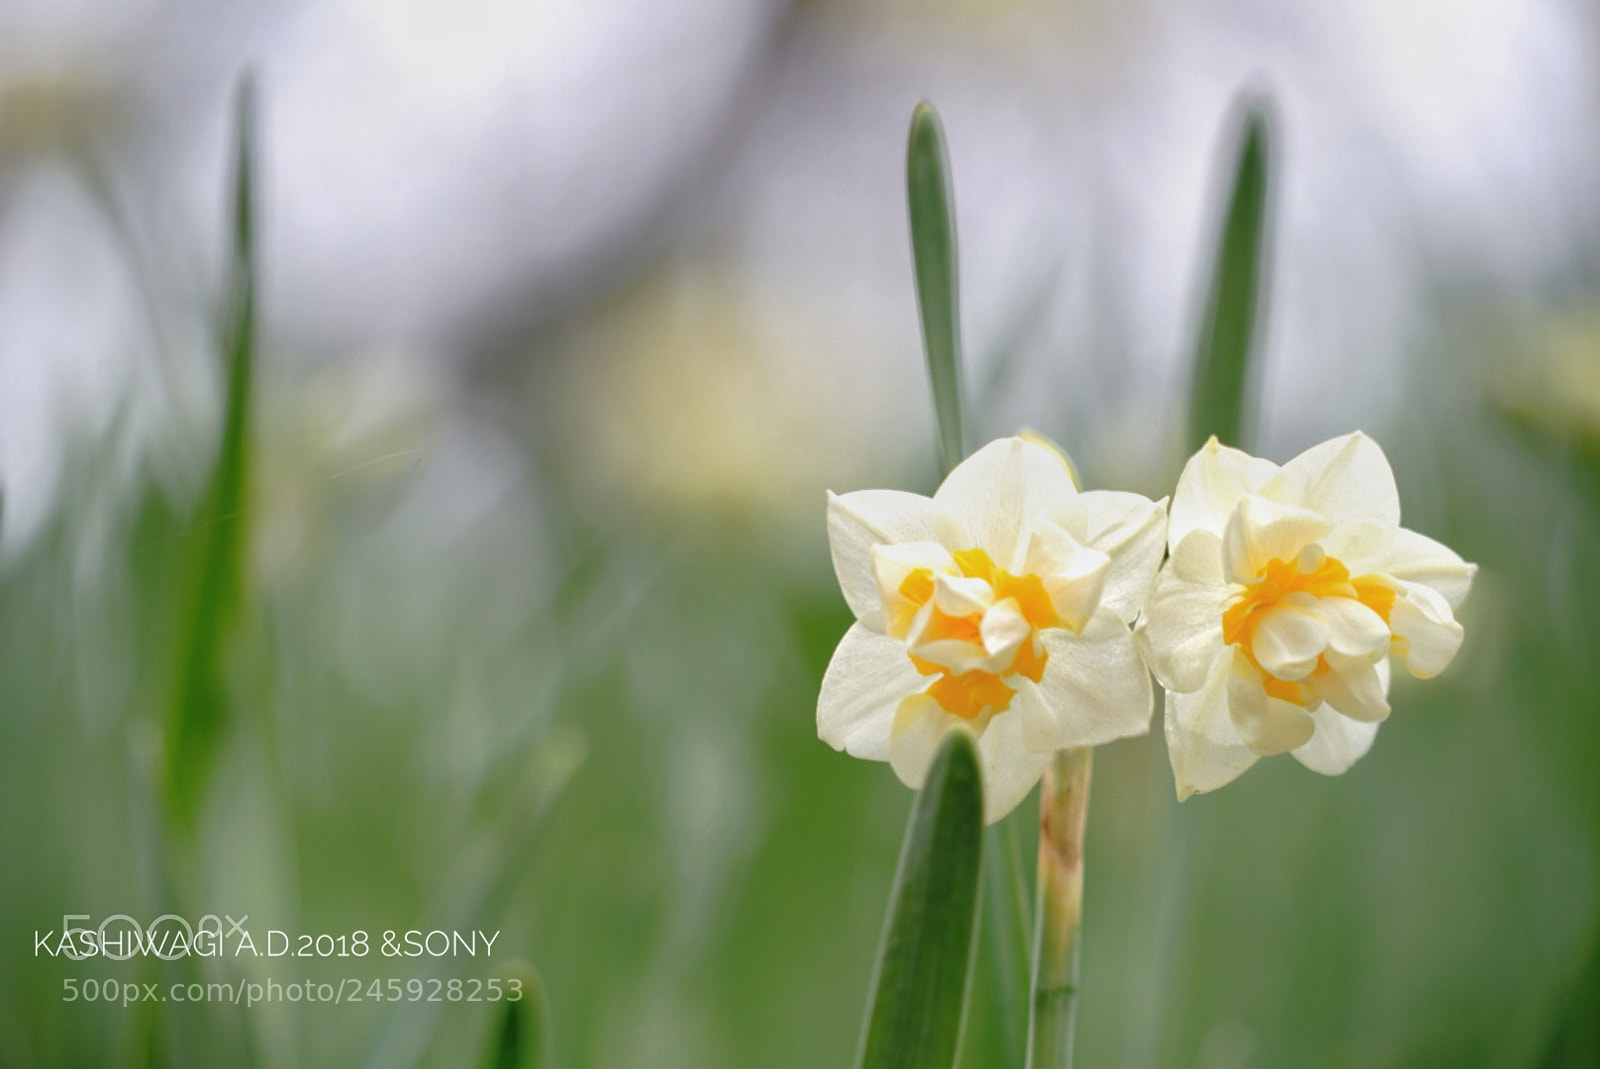 Sony a7 II sample photo. Narcissus quietly blooms in photography